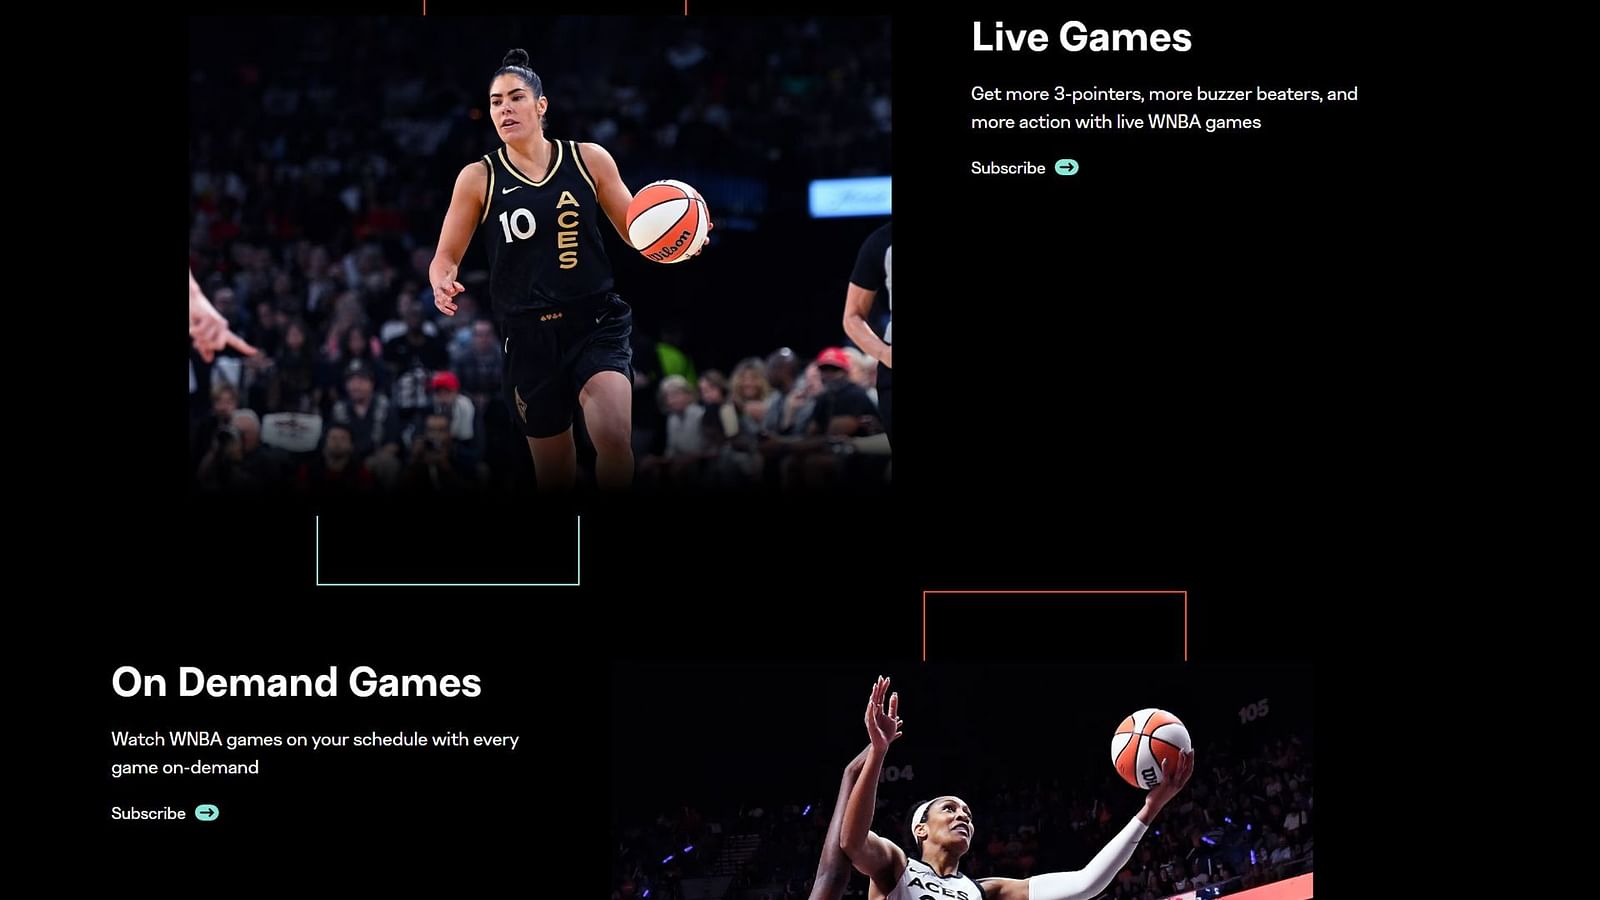 How much is the WNBA League Pass? Taking a closer look at what the pass